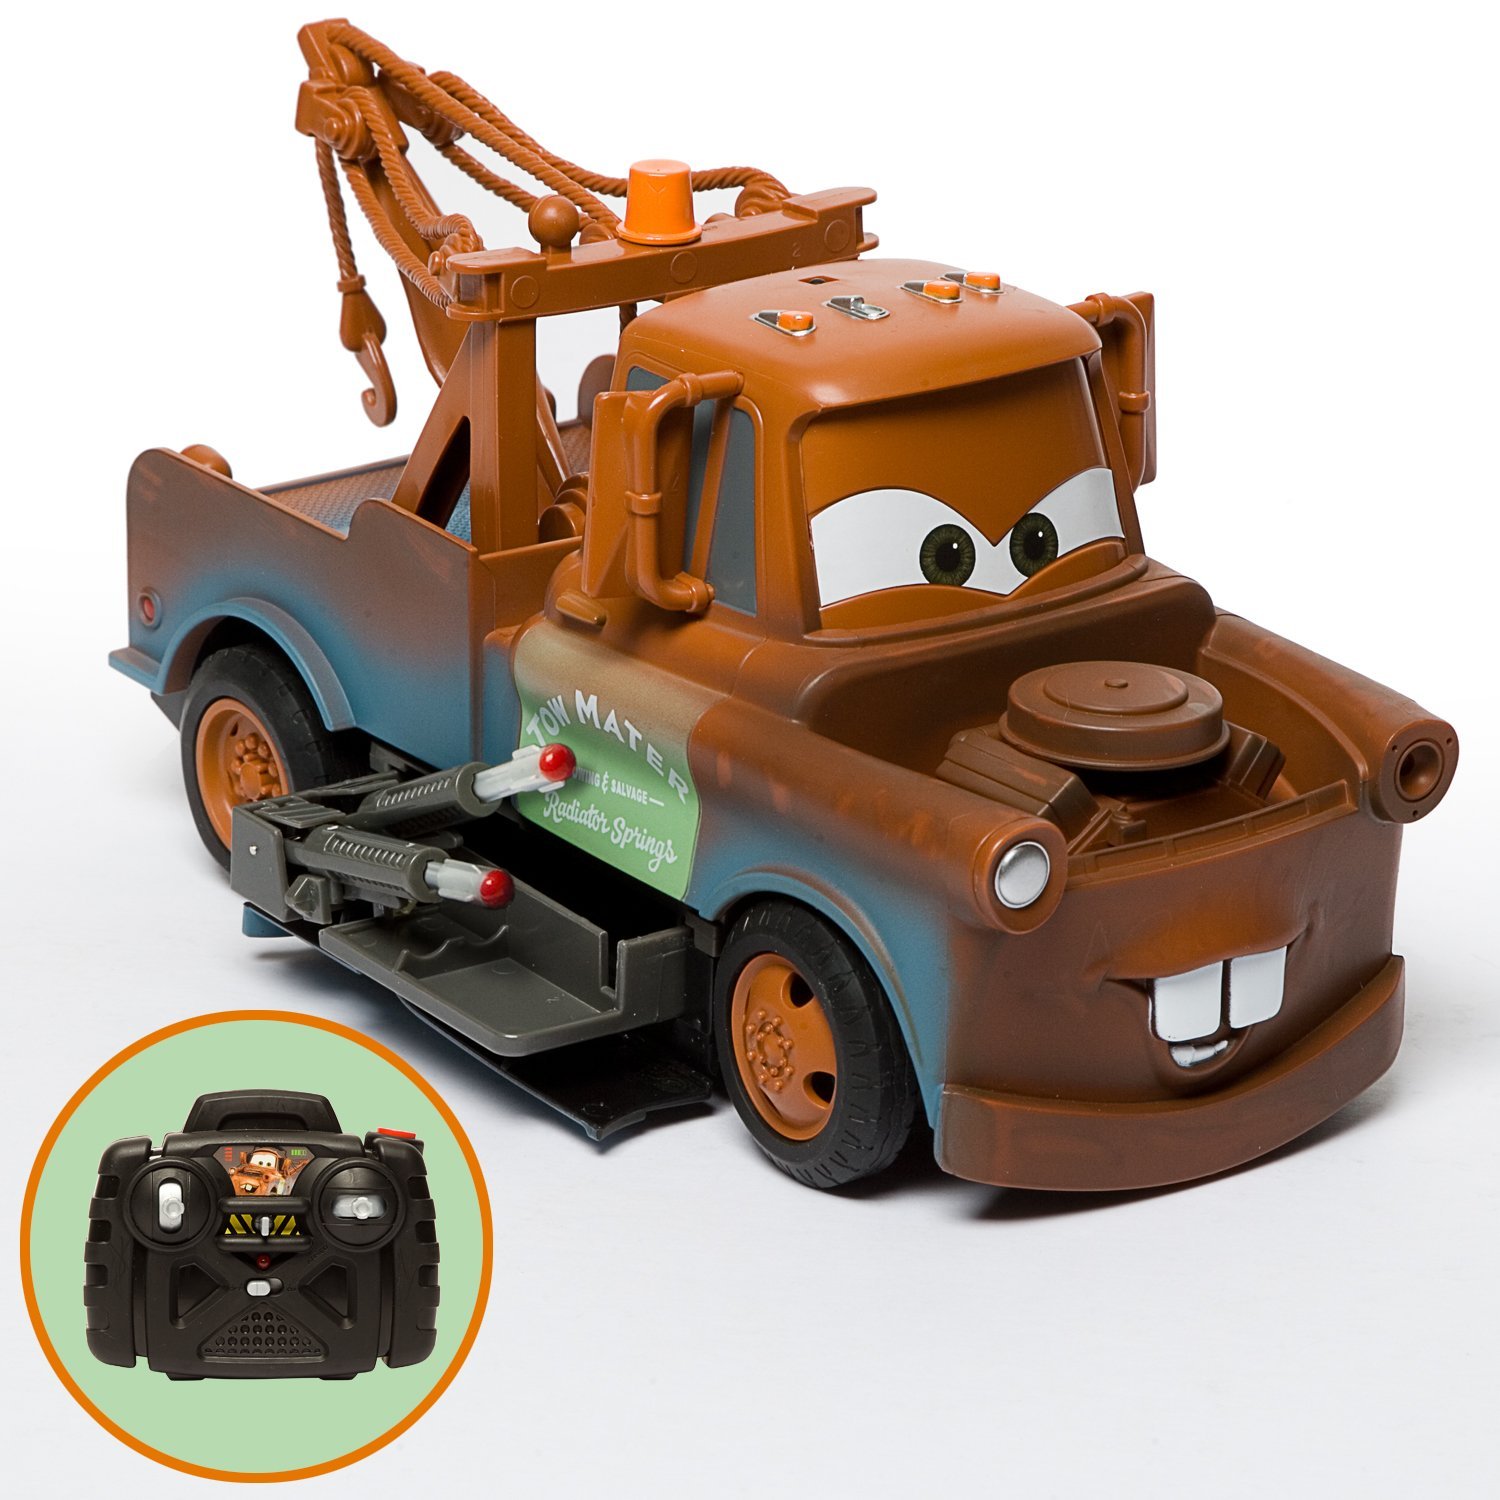 Cars 2 Mater Missile Firing Vehicle  $24.99